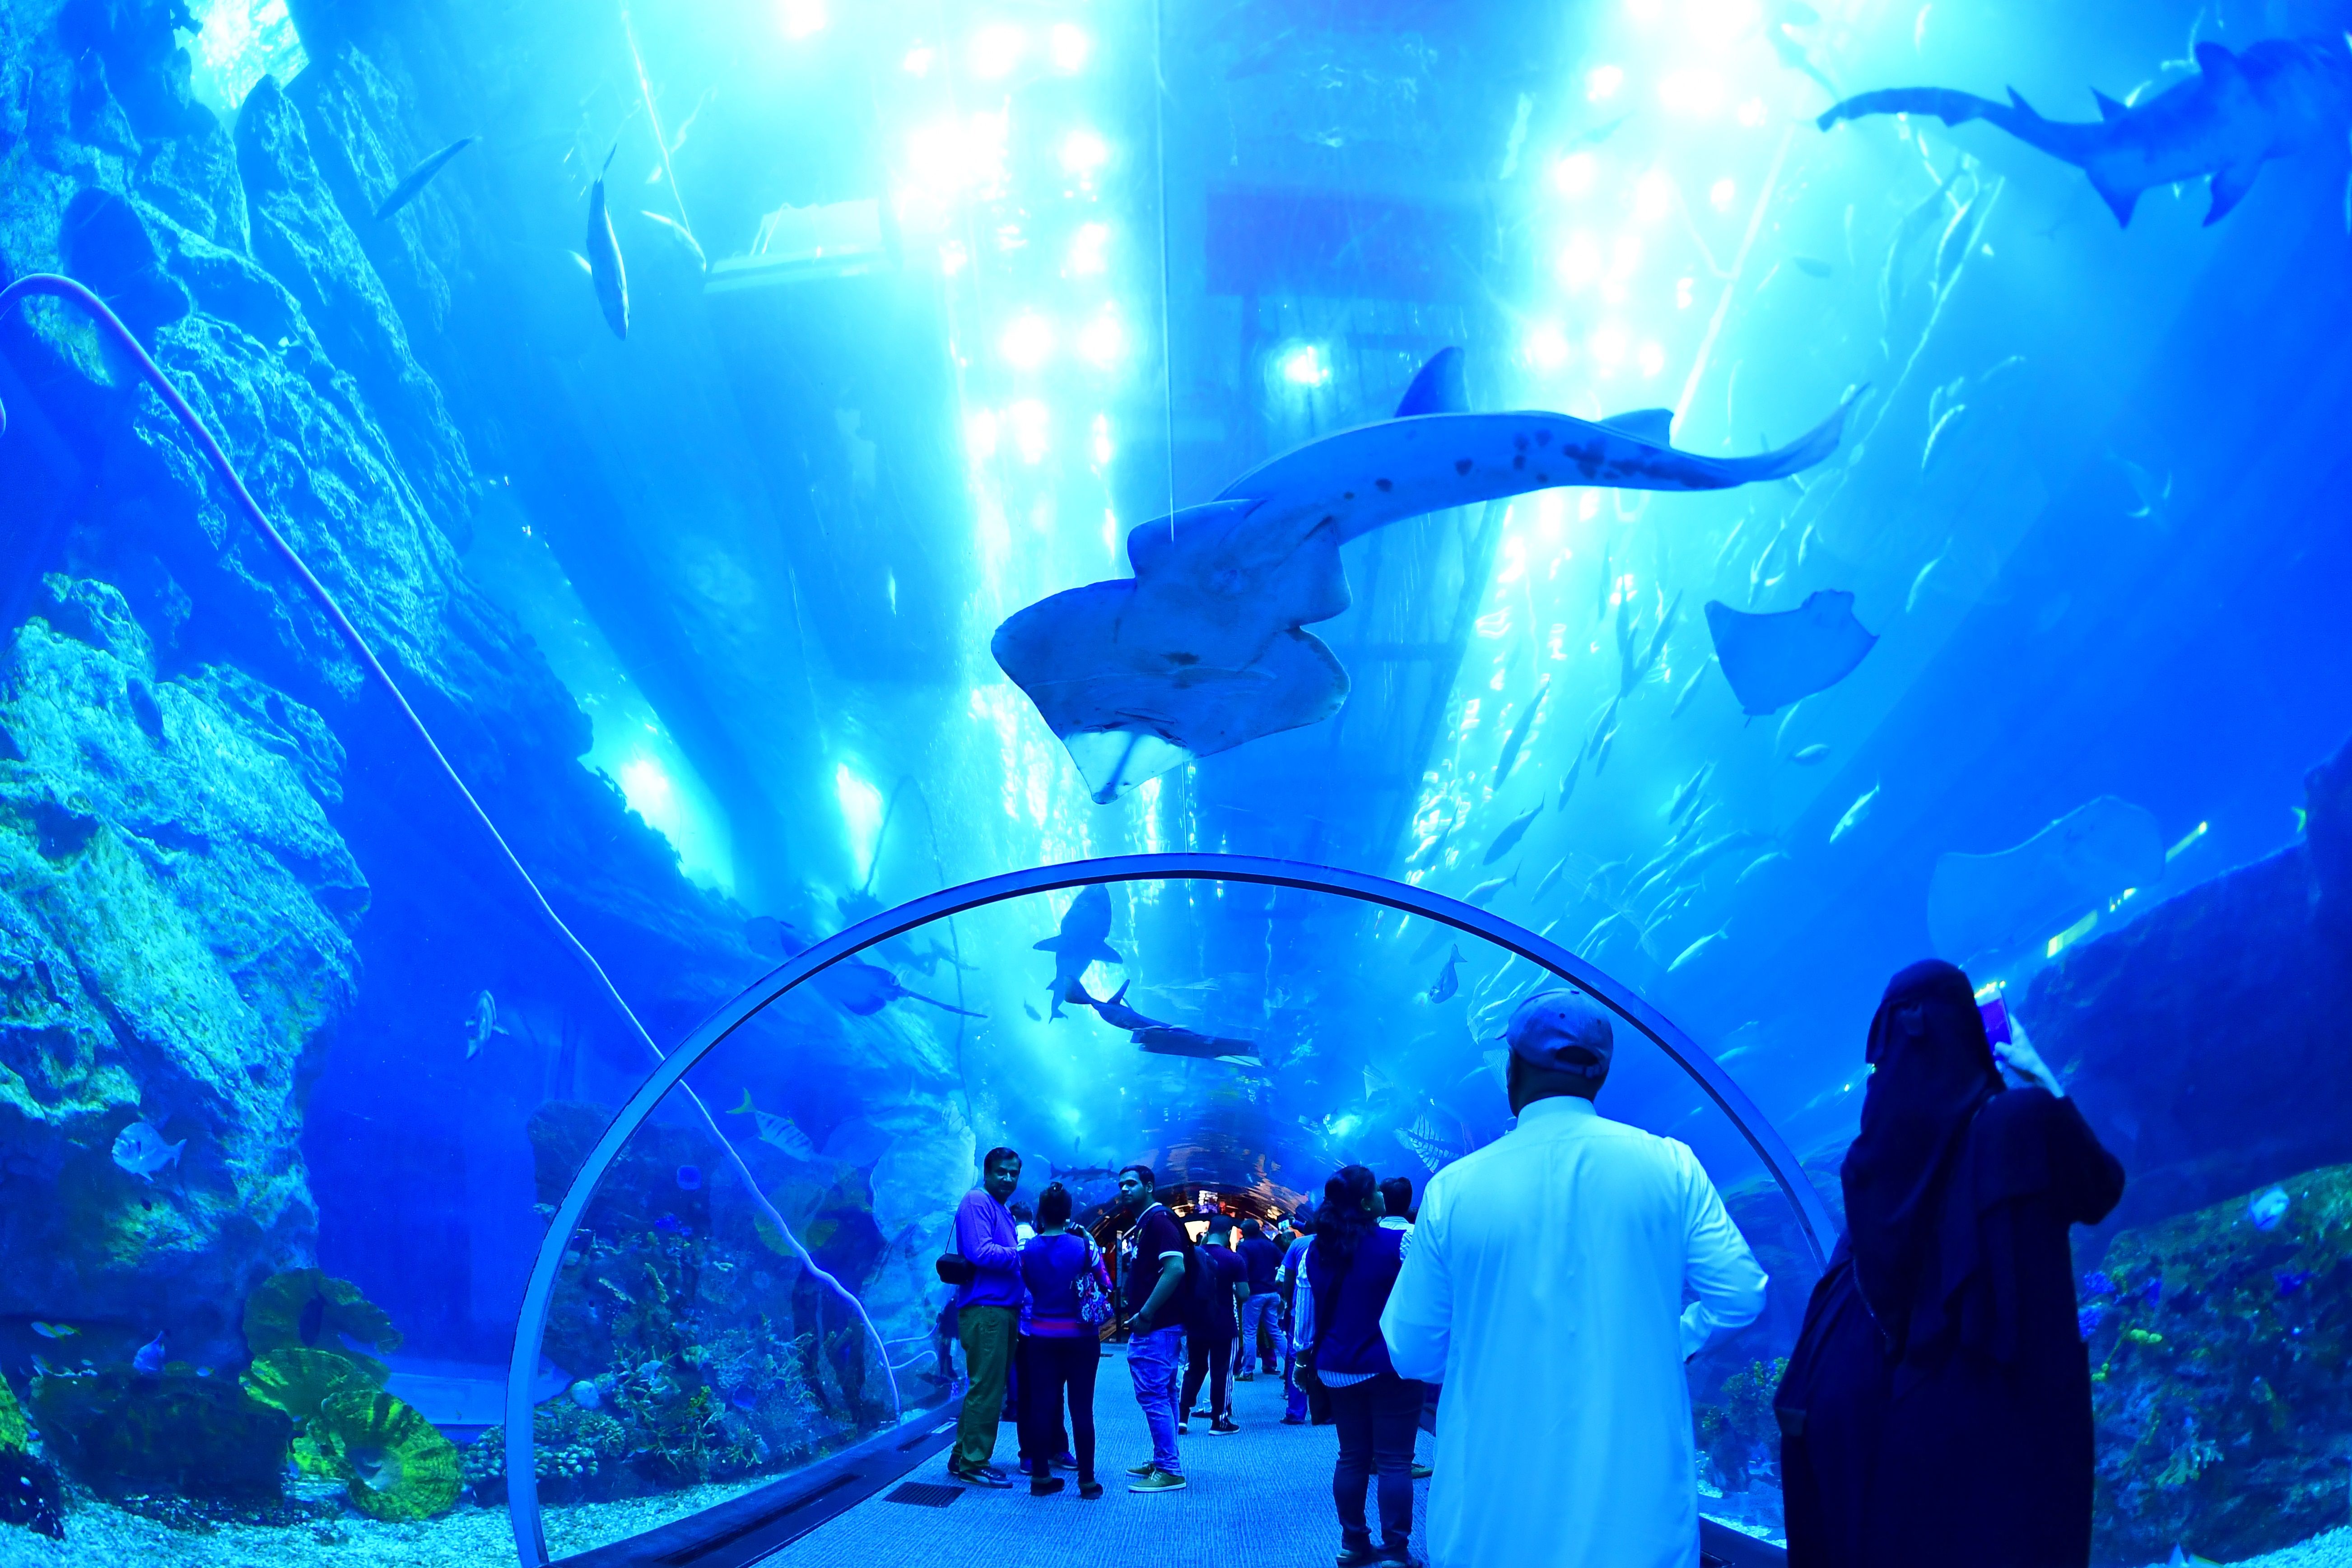 TOPSHOT - Tourists and locals visit the Dubai Mall aquarium in downtown Dubai on January 2, 2019. (Photo by GIUSEPPE CACACE / AFP) (Photo credit should read GIUSEPPE CACACE/AFP/Getty Images)